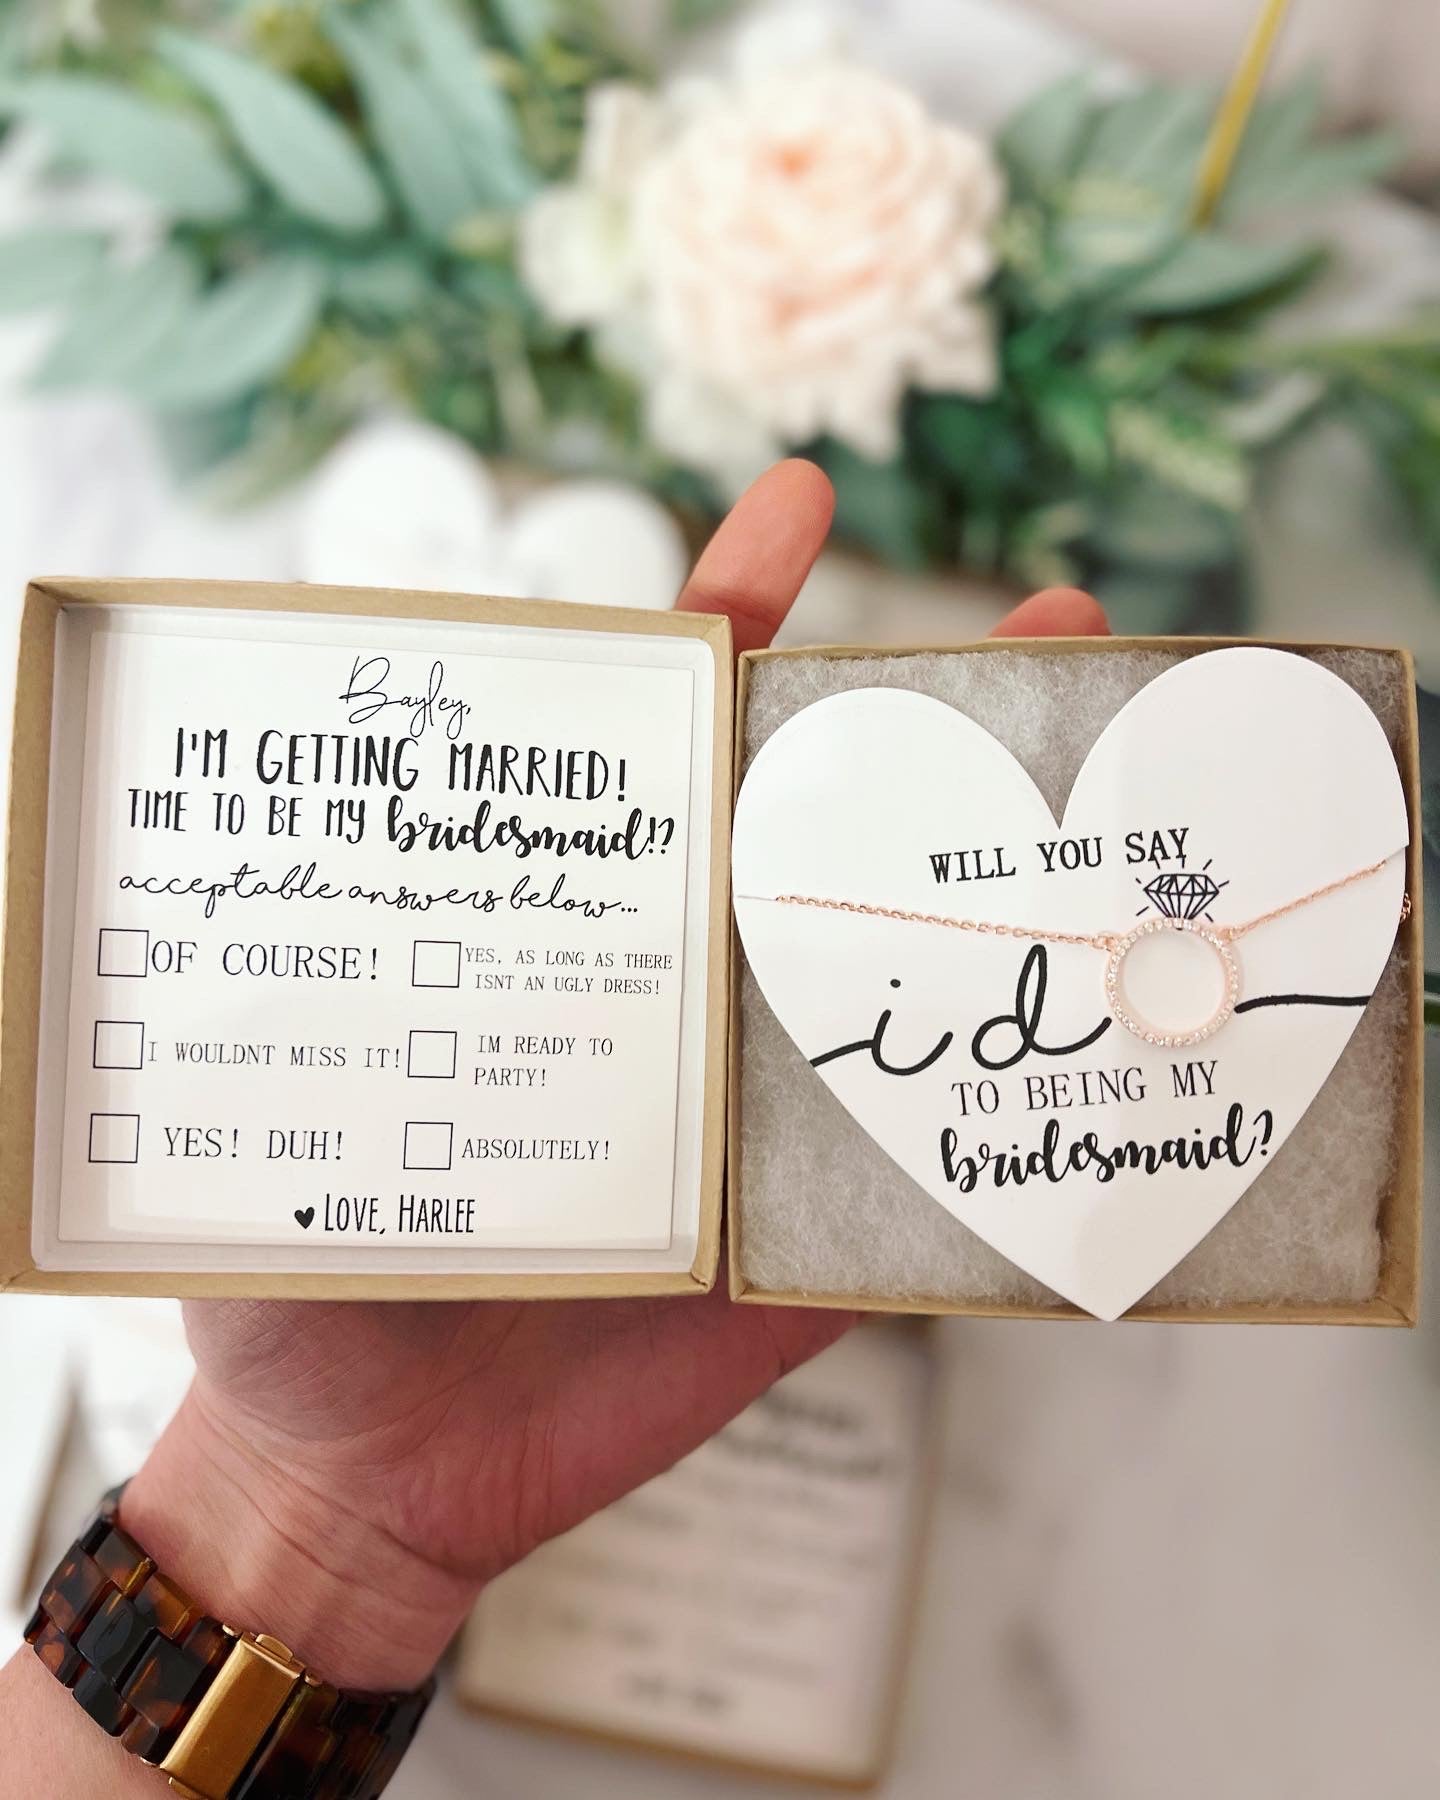 I'm Getting Married! Be My Bridesmaid?